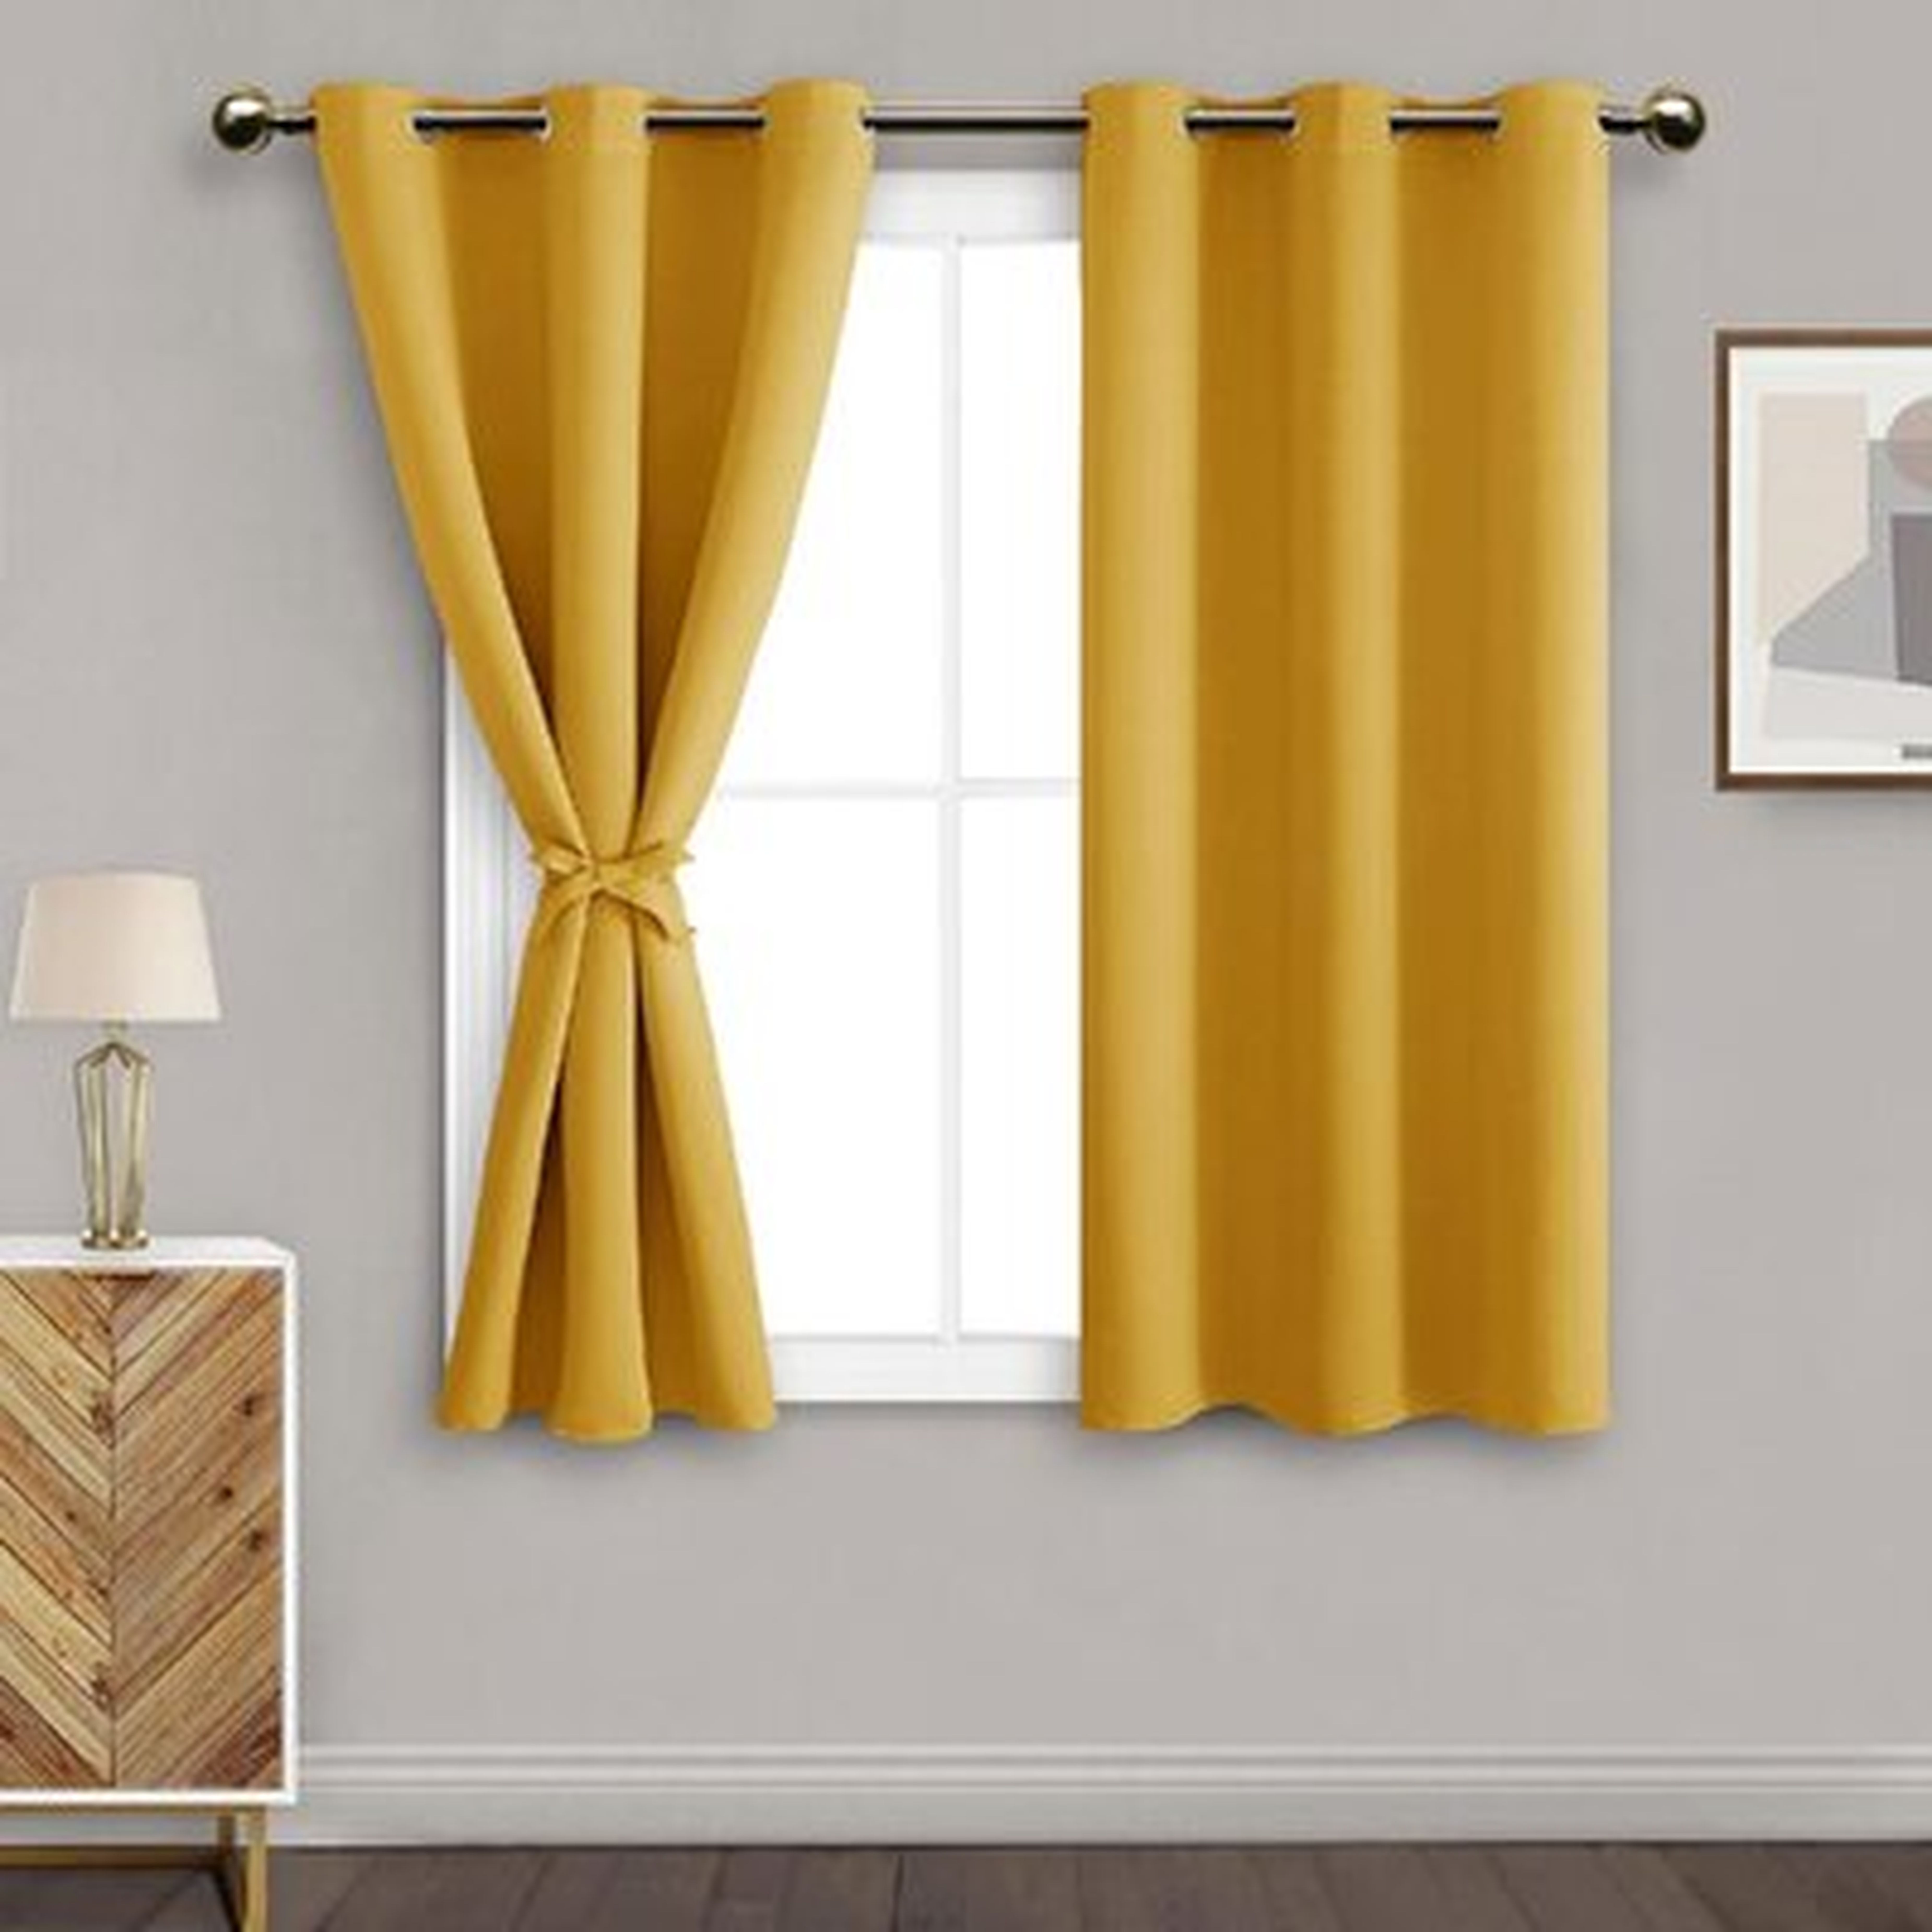 Blackout Curtains For Bedroom With Tiebacks - Room Darkening Privacy Grommet Top Window Curtains For Living Room, 38 X 45 Inch Length, Set Of 2 Panels - Wayfair